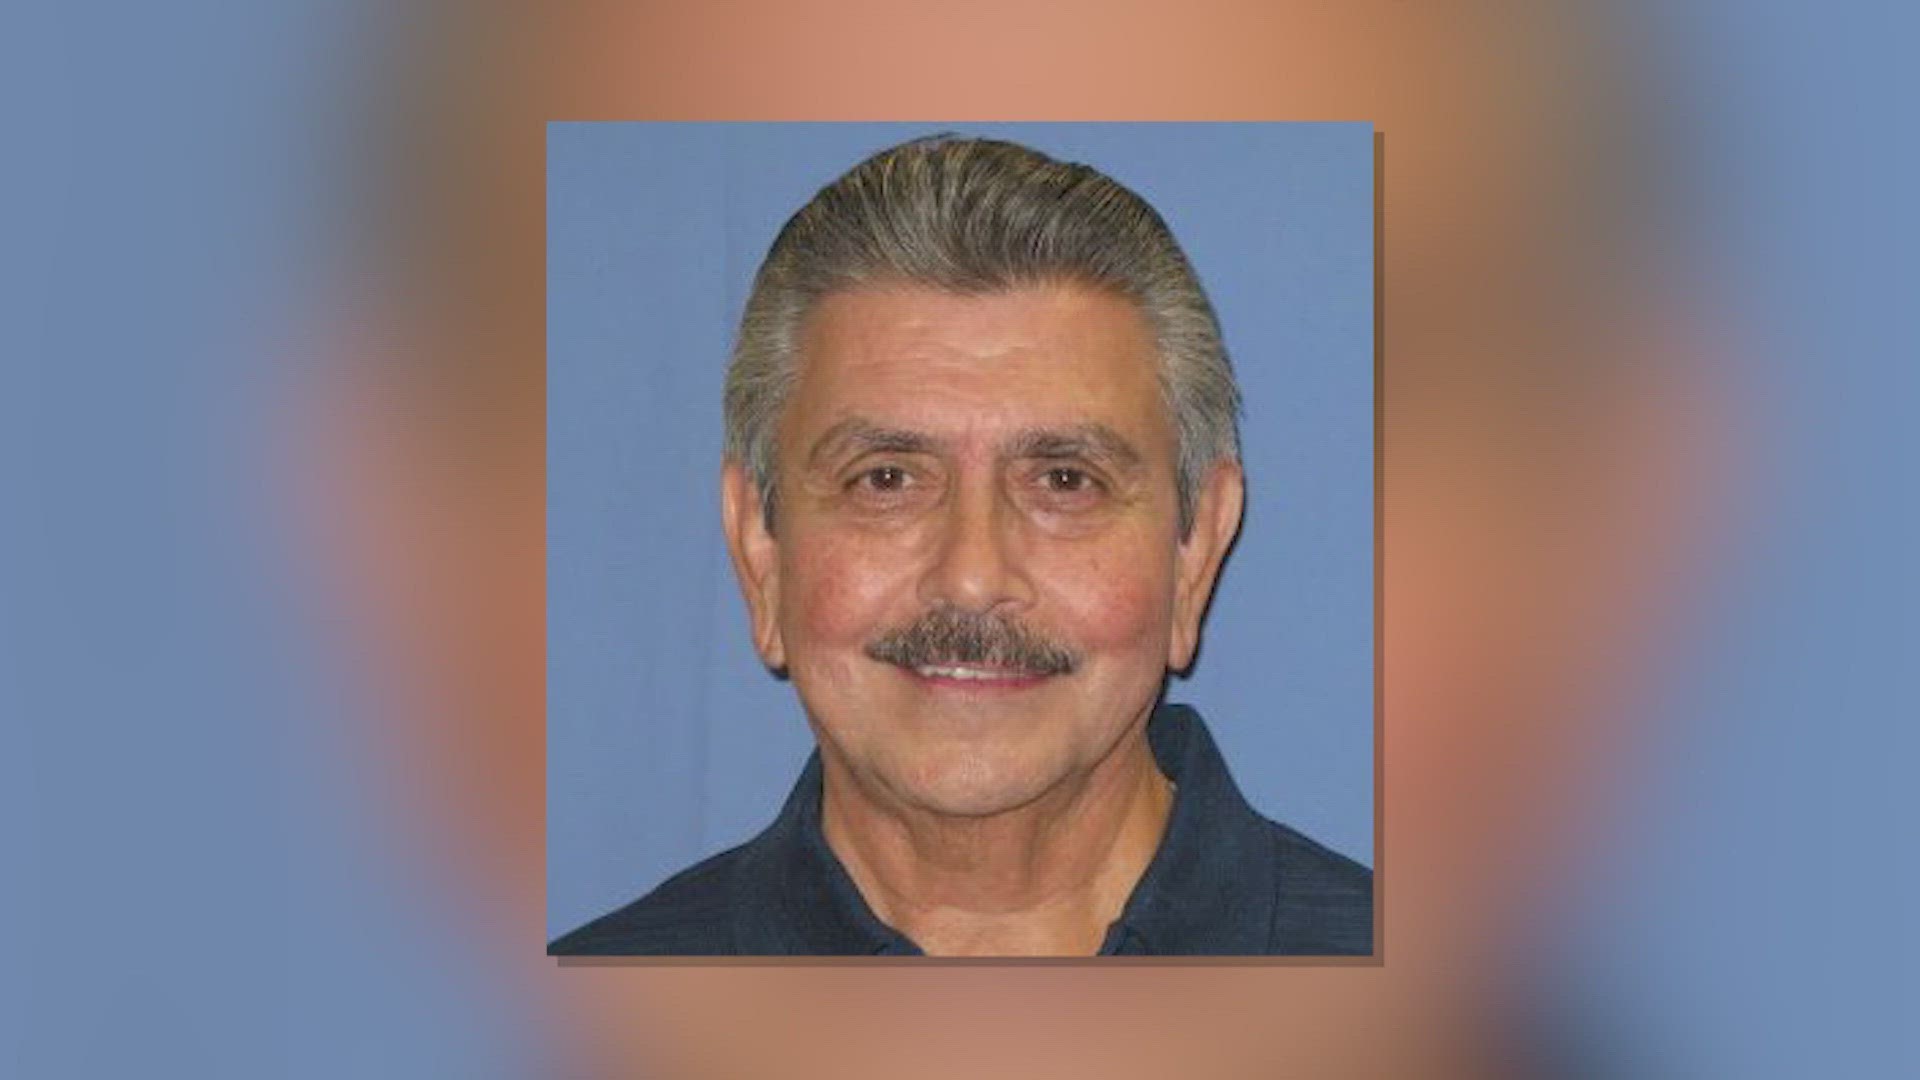 Alfred Jimenez, better known by students as Mr. Fred, will be laid to rest following a service in Helotes Monday.